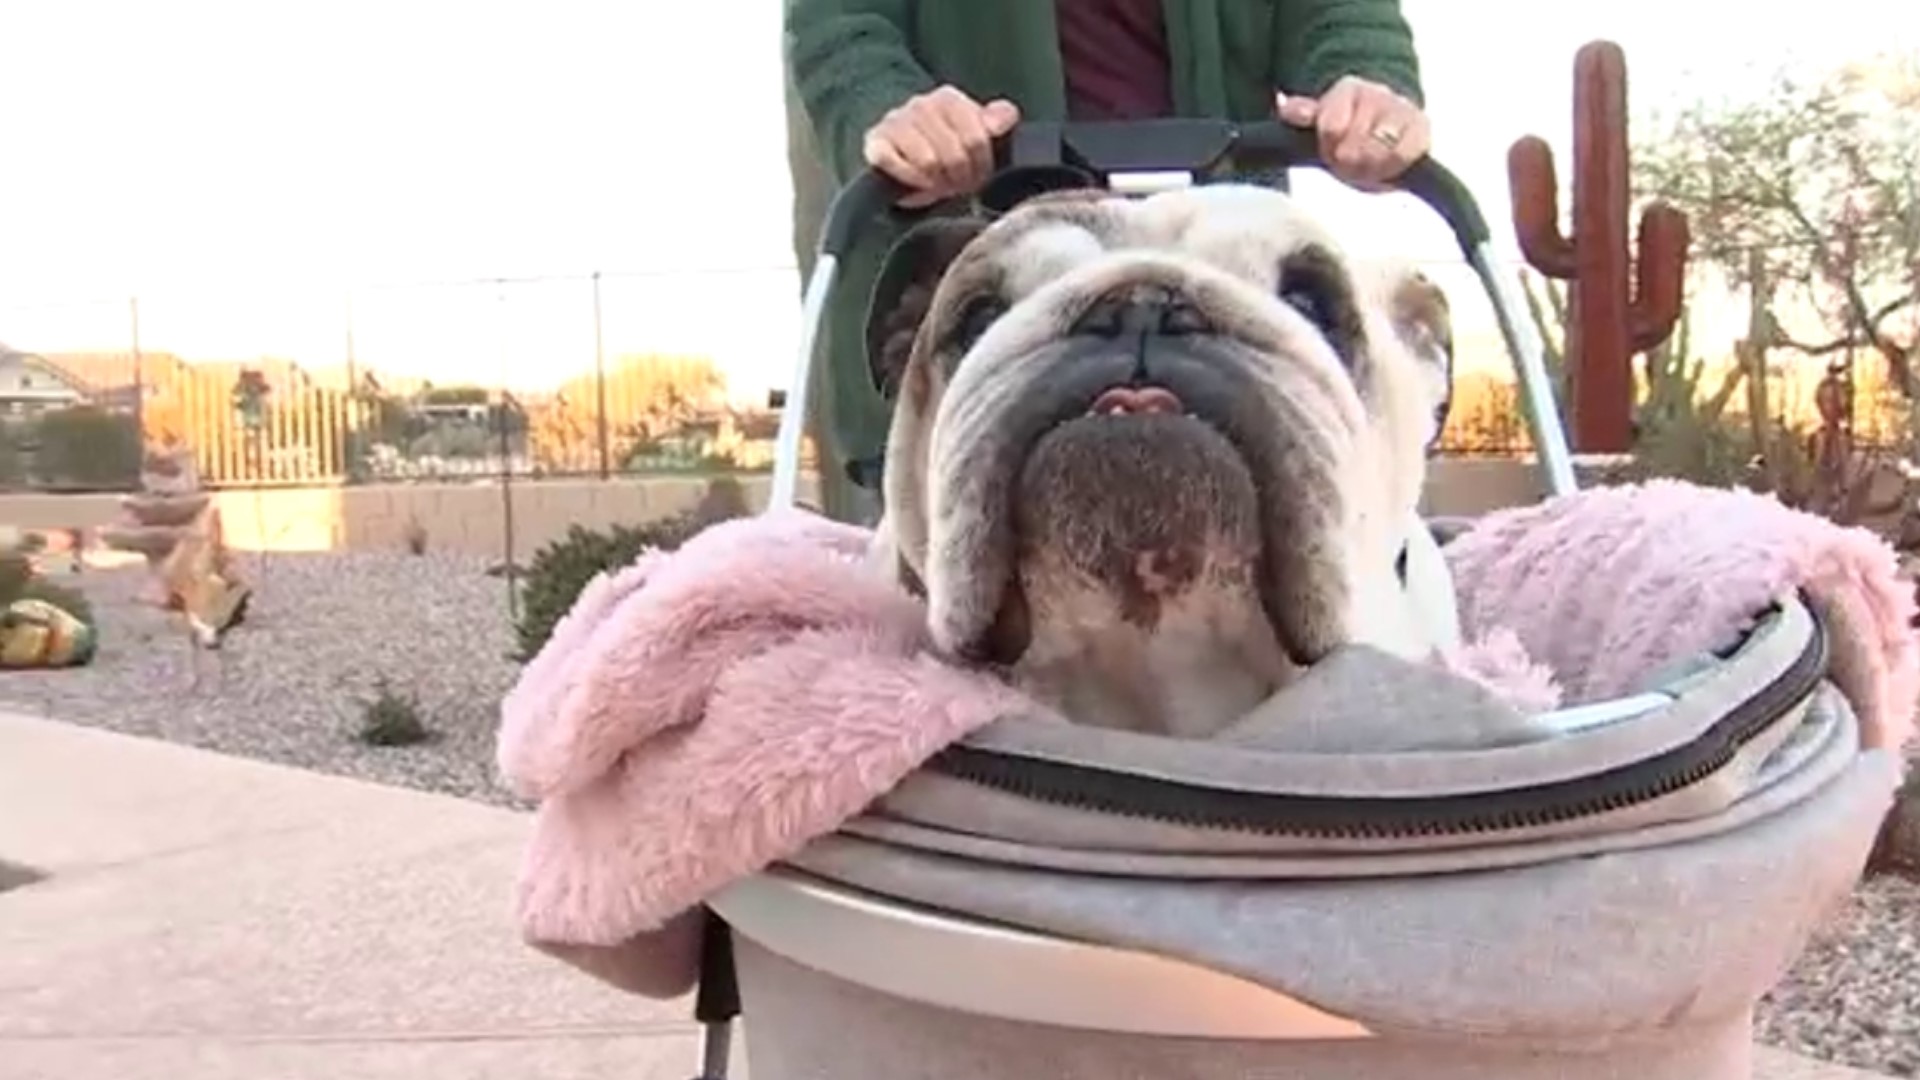 An Arizona HVAC worker saved a beloved family dog struggling after falling into the backyard pool.